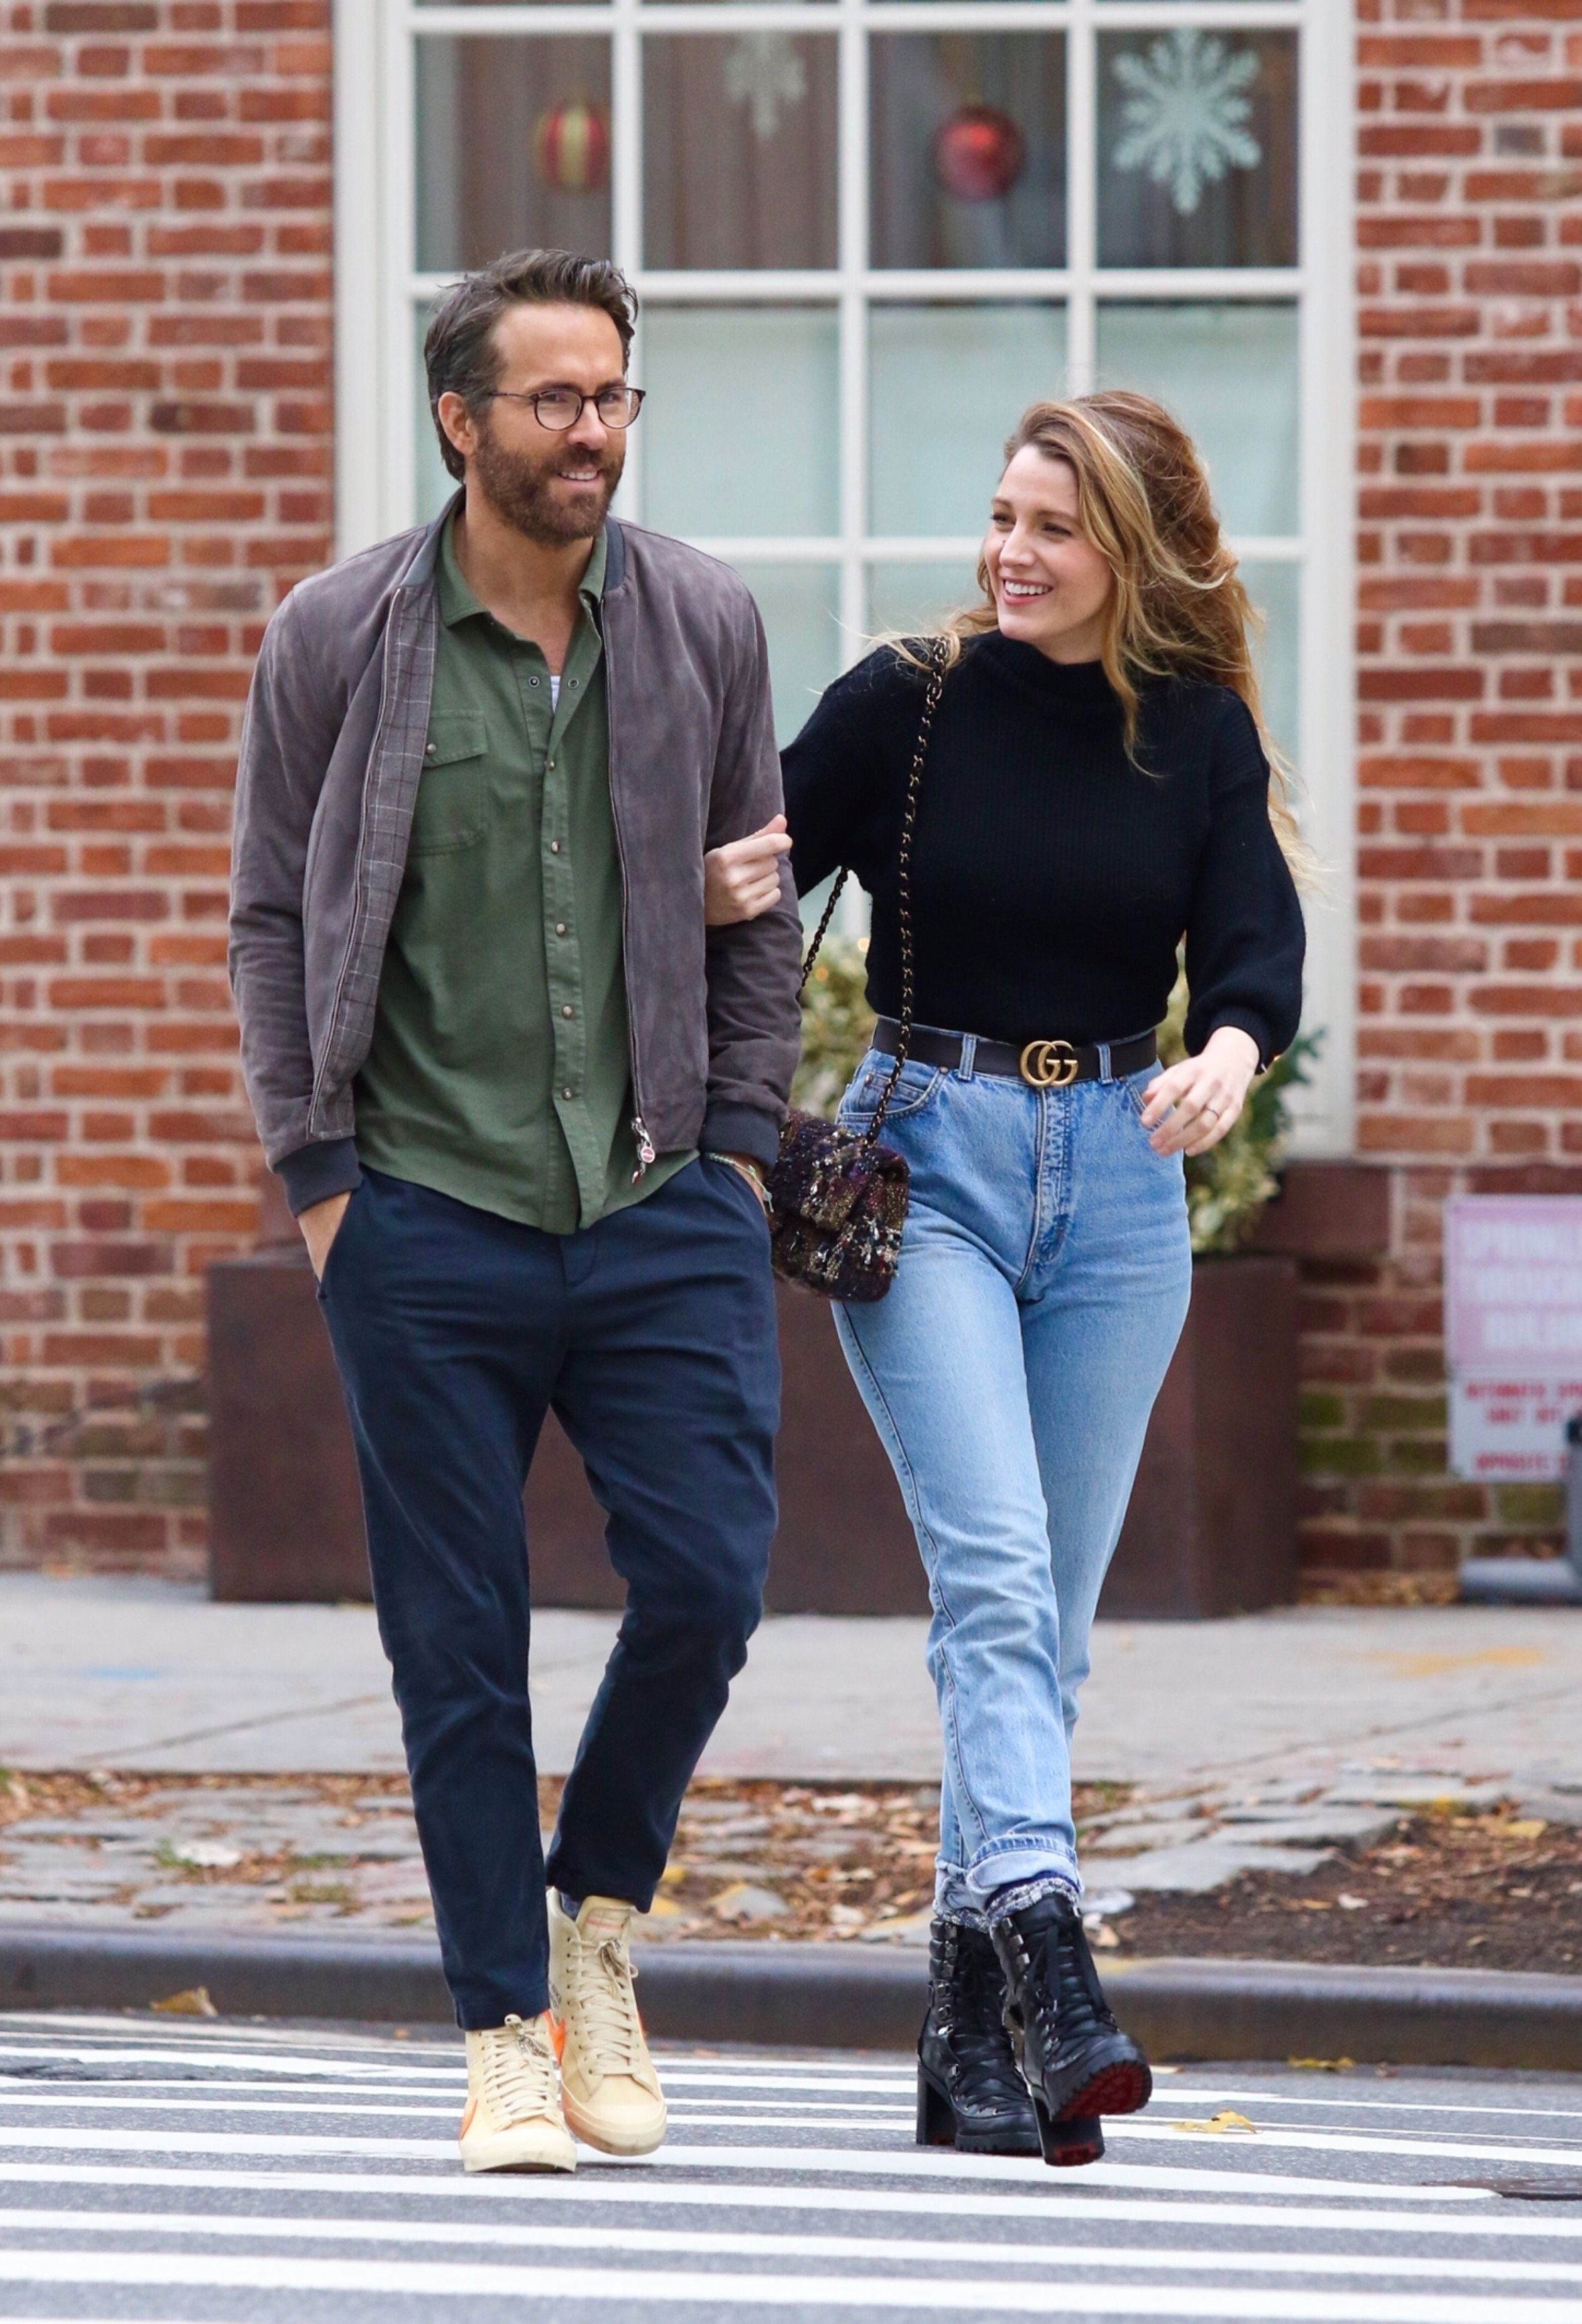 Blake Lively and Ryan Reynolds Looked Straight Out of a Holiday Rom-Com During a Stroll in NYC